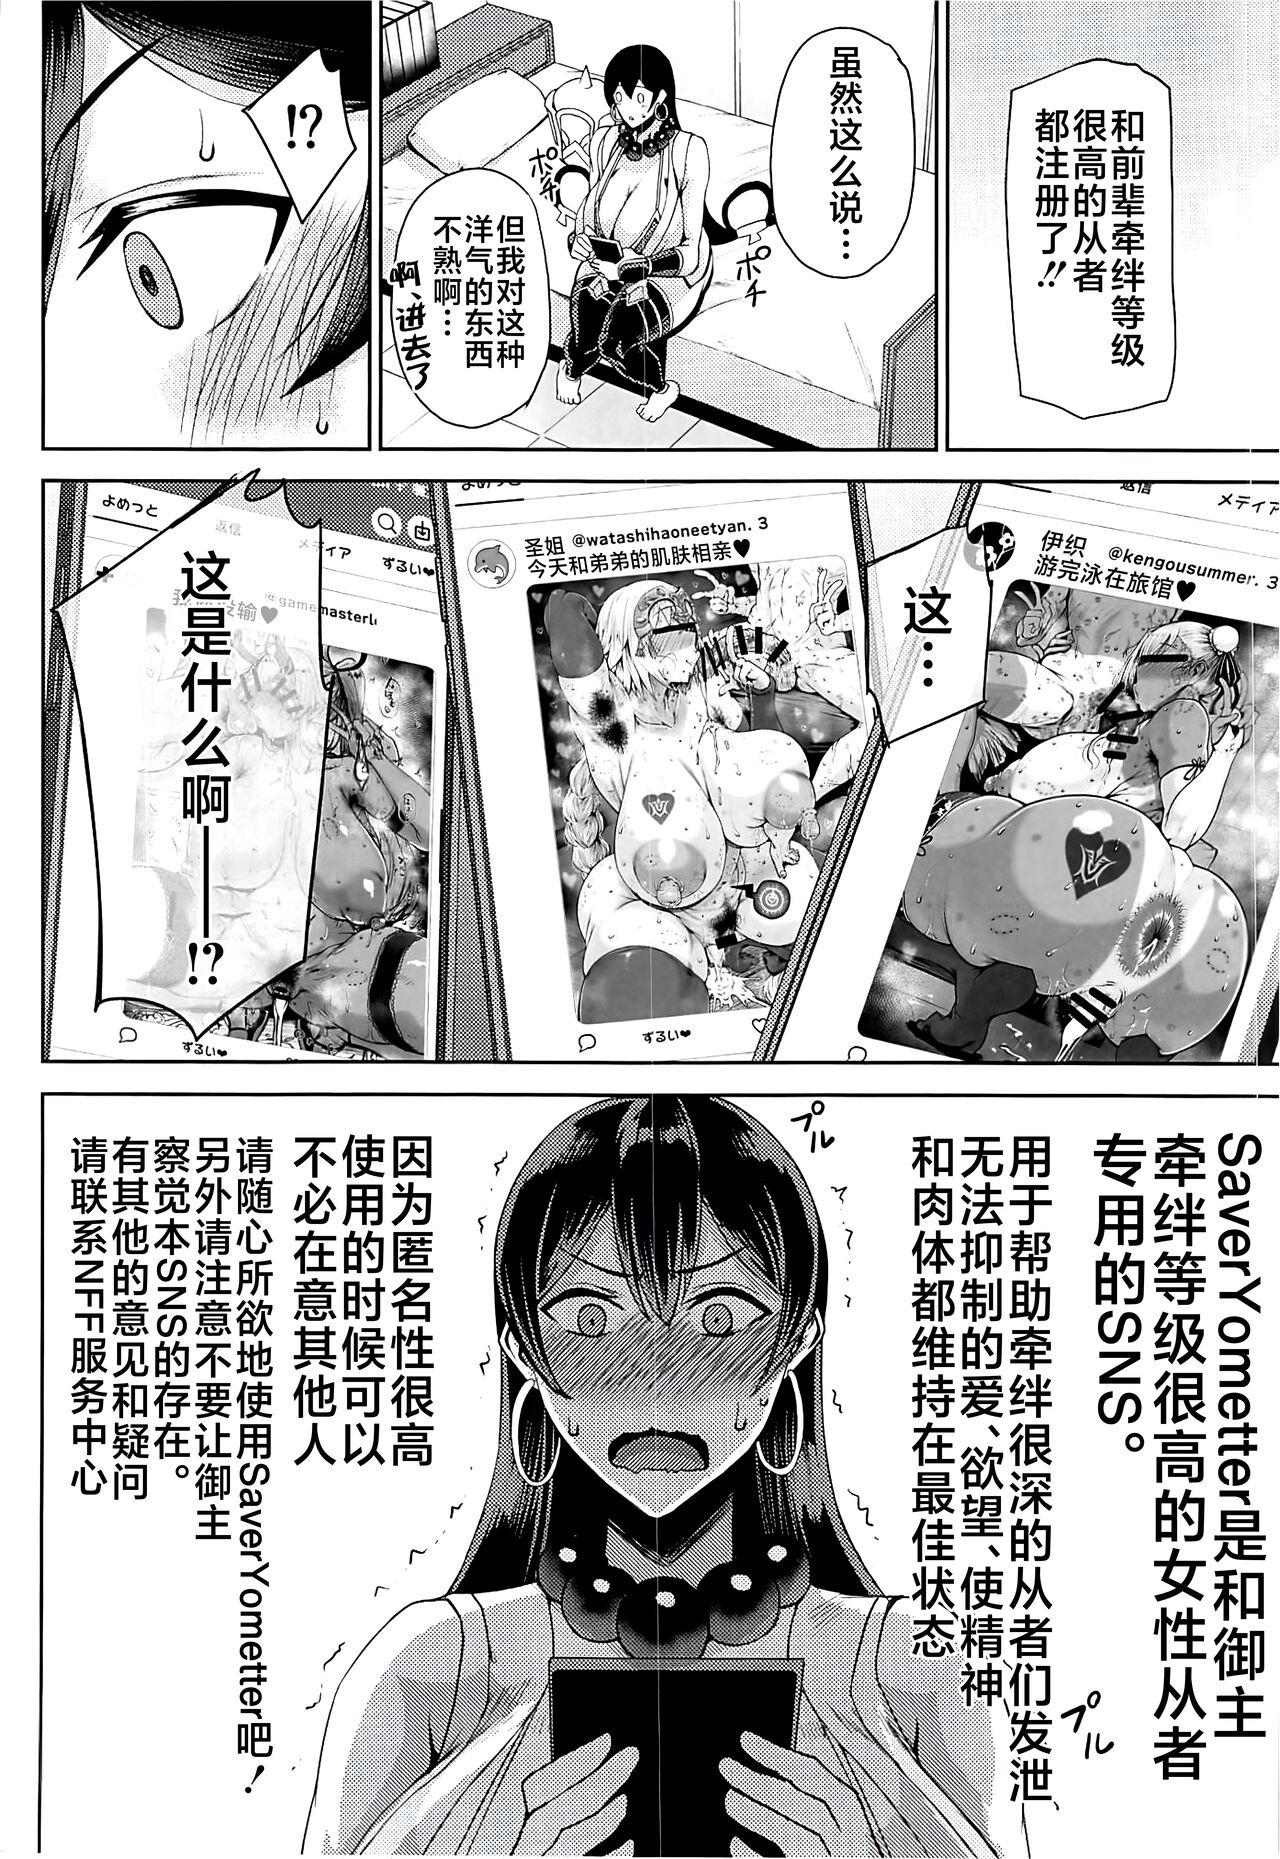 Fun Shugyou Now - Fate grand order Groupsex - Page 3